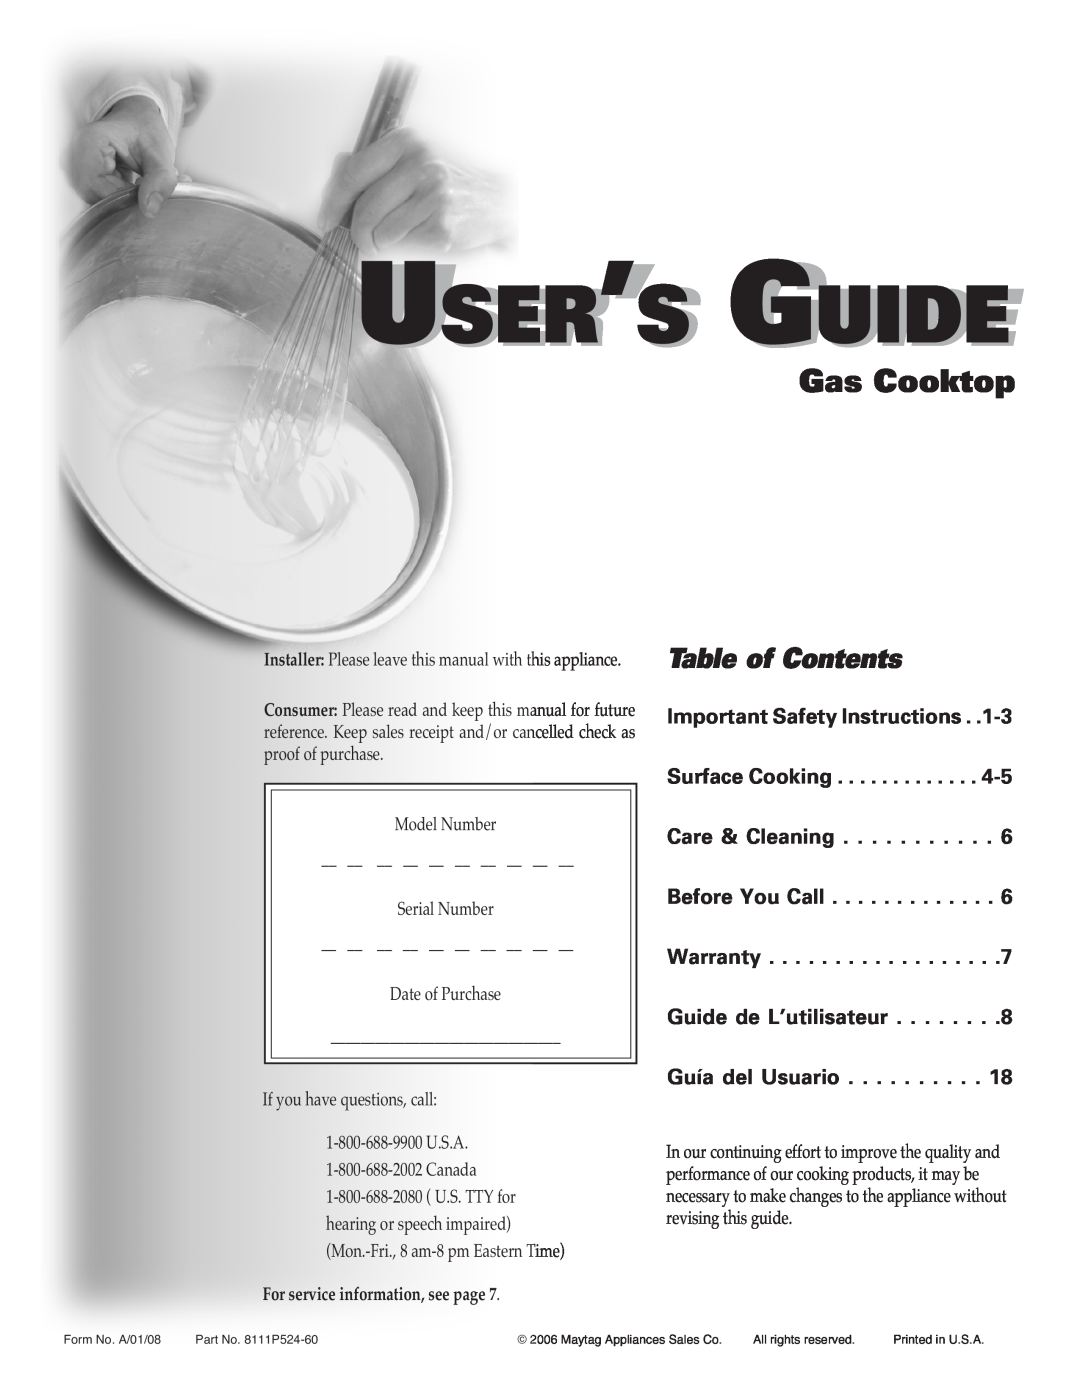 Maytag MGC4436BDB important safety instructions User’S Guide, Gas Cooktop, Table of Contents 